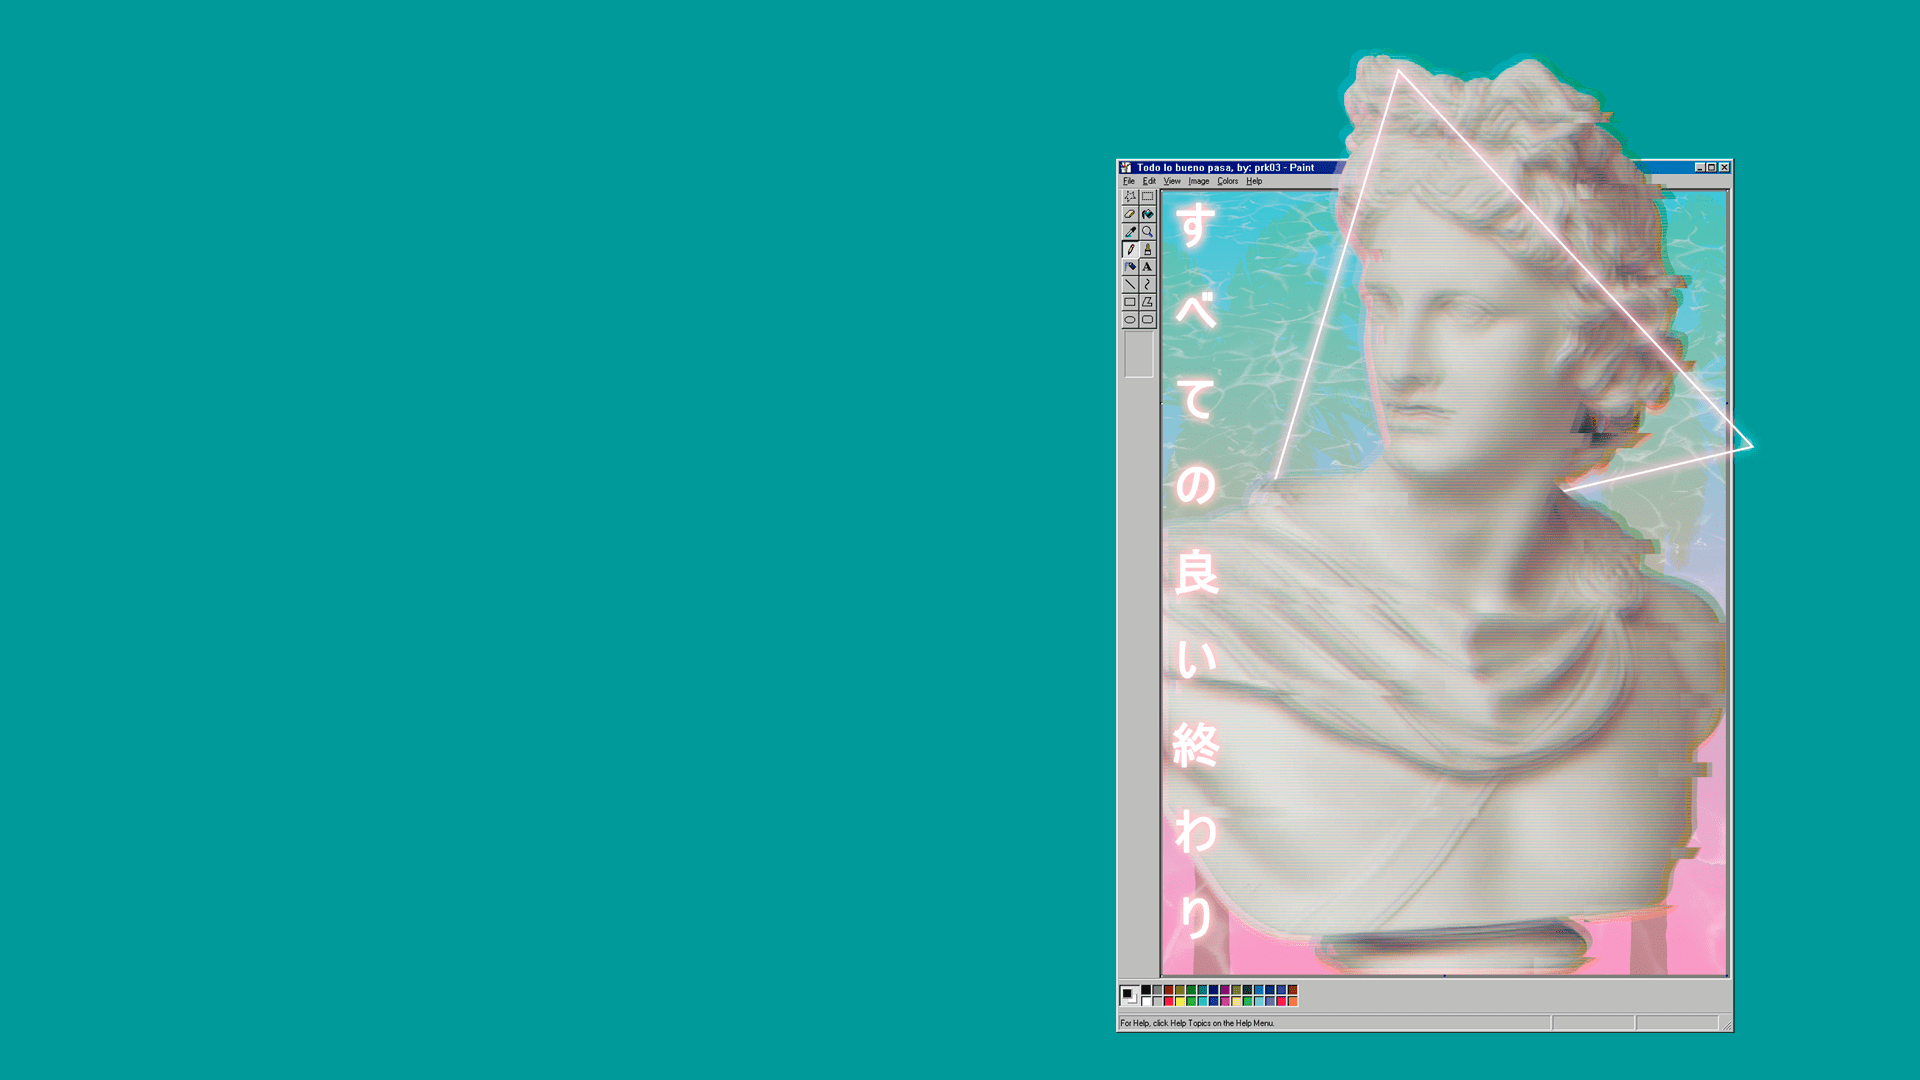 vaporwave, Windows simple background, turquoise Gallery HD Wallpaper